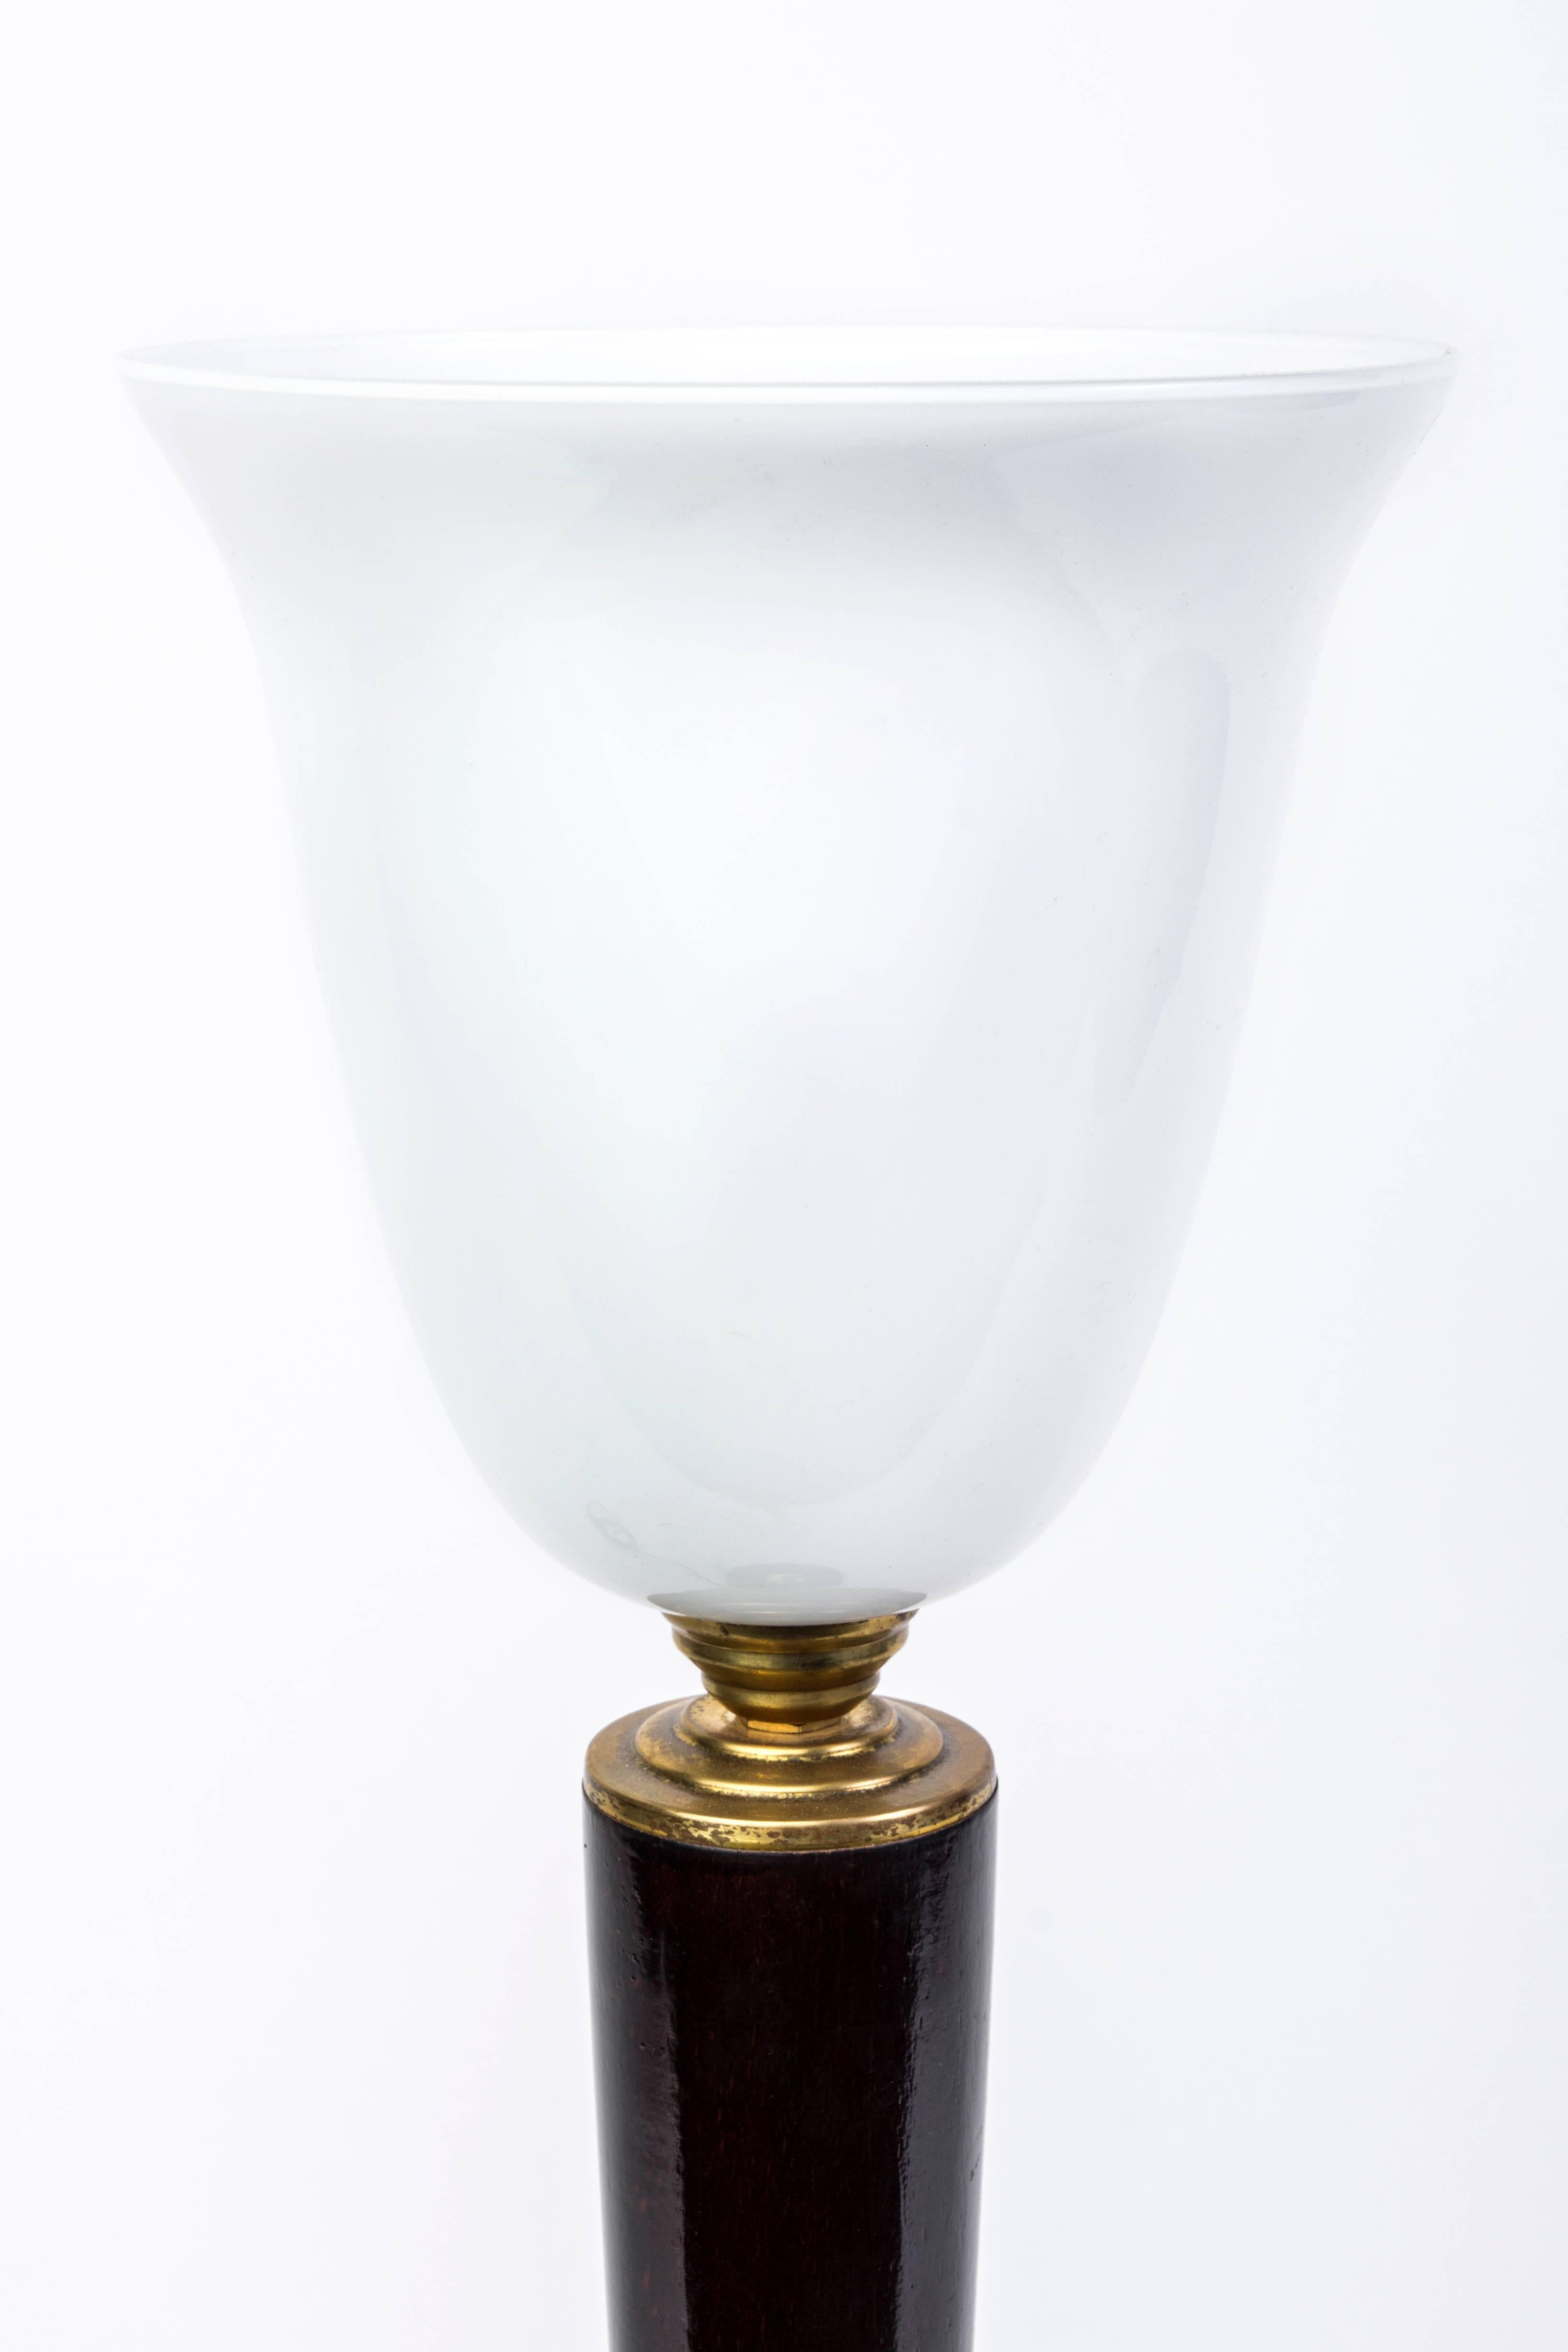 This wonderful 1930s French Art Deco tabletop lamp by Mazda features a wood base with brass detailing with a pearl opaline glass shade. It has been newly rewired and is in excellent condition.